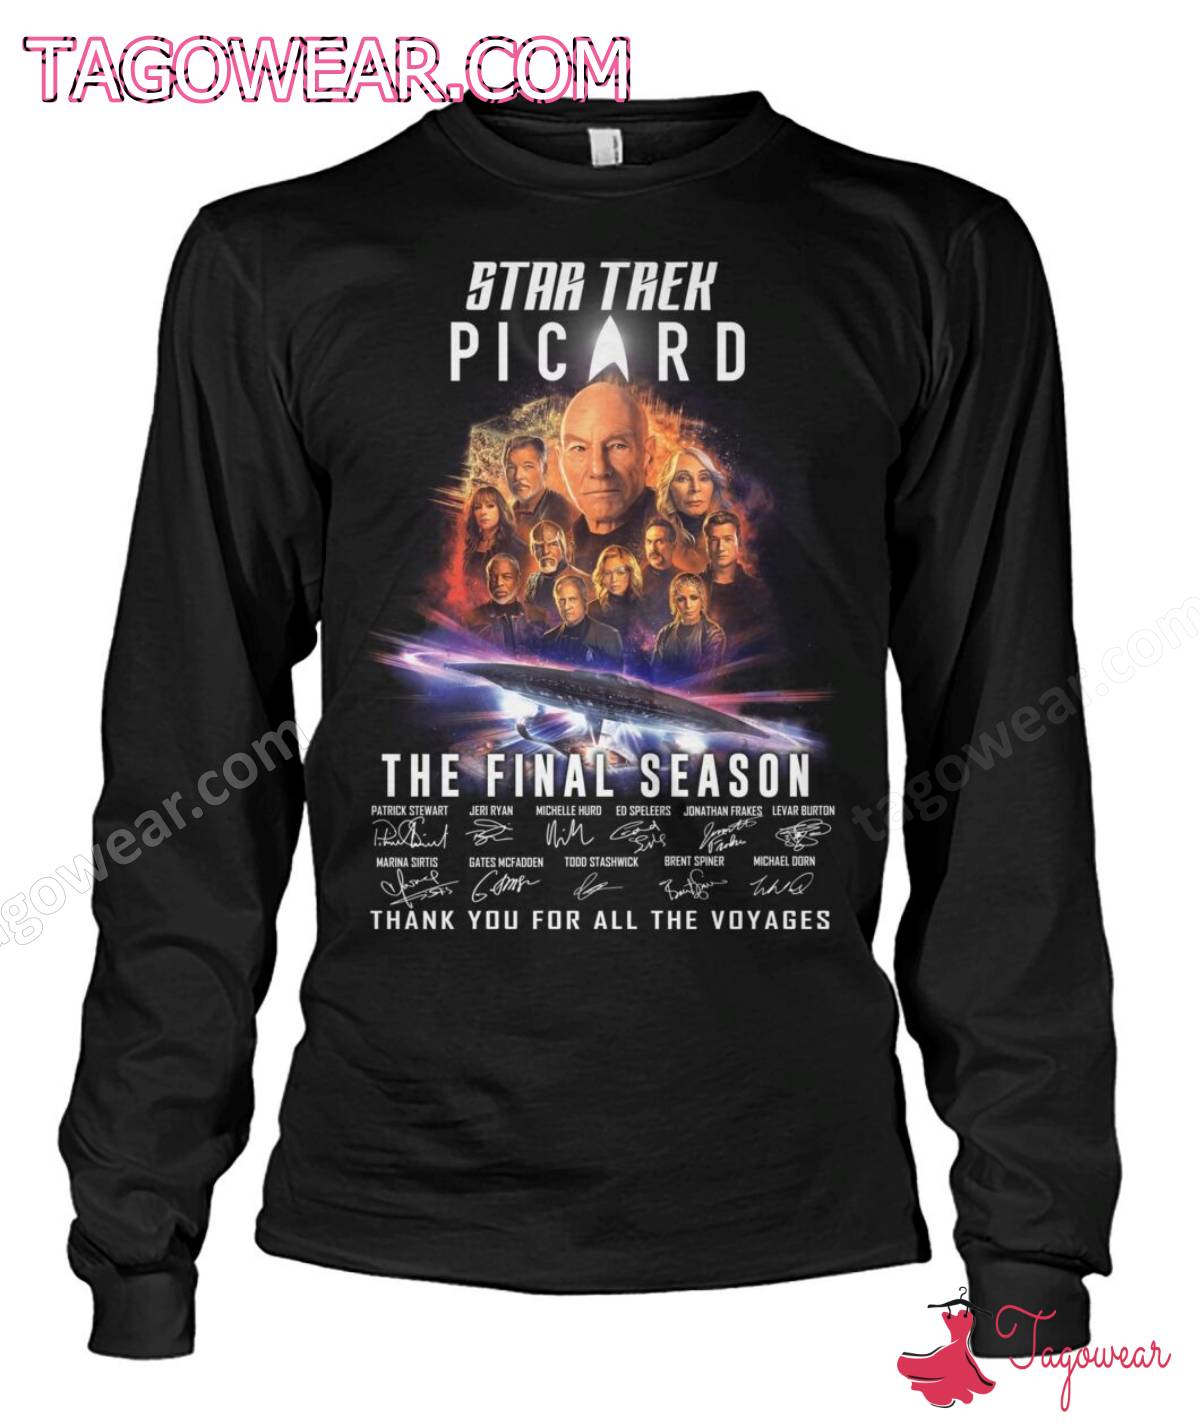 Star Trek Picard The Final Season Signatures Thank You For All The Voyages Shirt, Tank Top a